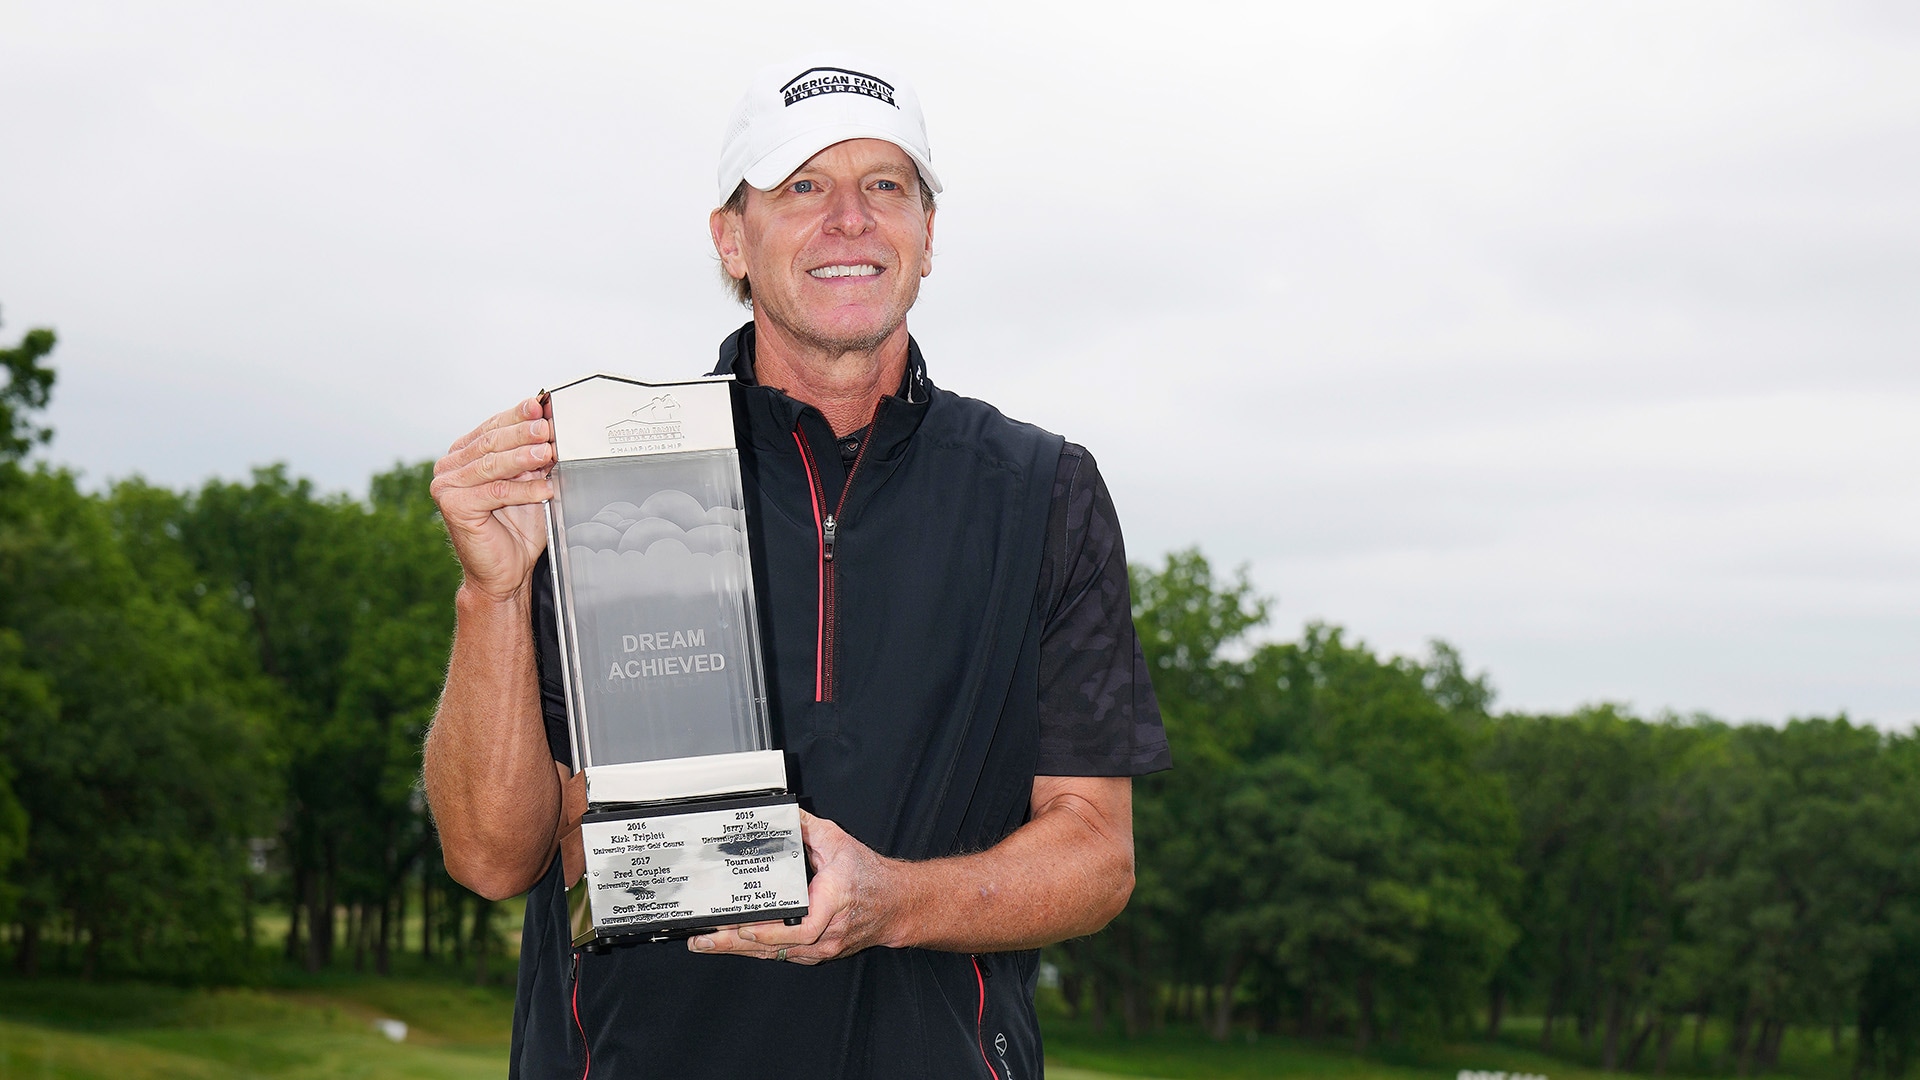 Steve Stricker wins his Champions event in home state of Wisconsin